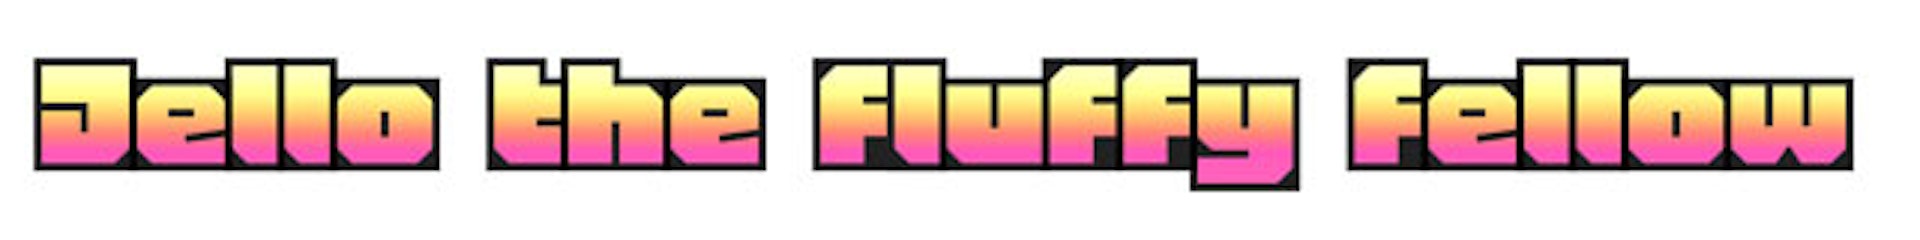 Honk variable color font text in pink and yellow with dark long shadow featuring text Jello is a fluffy fellow